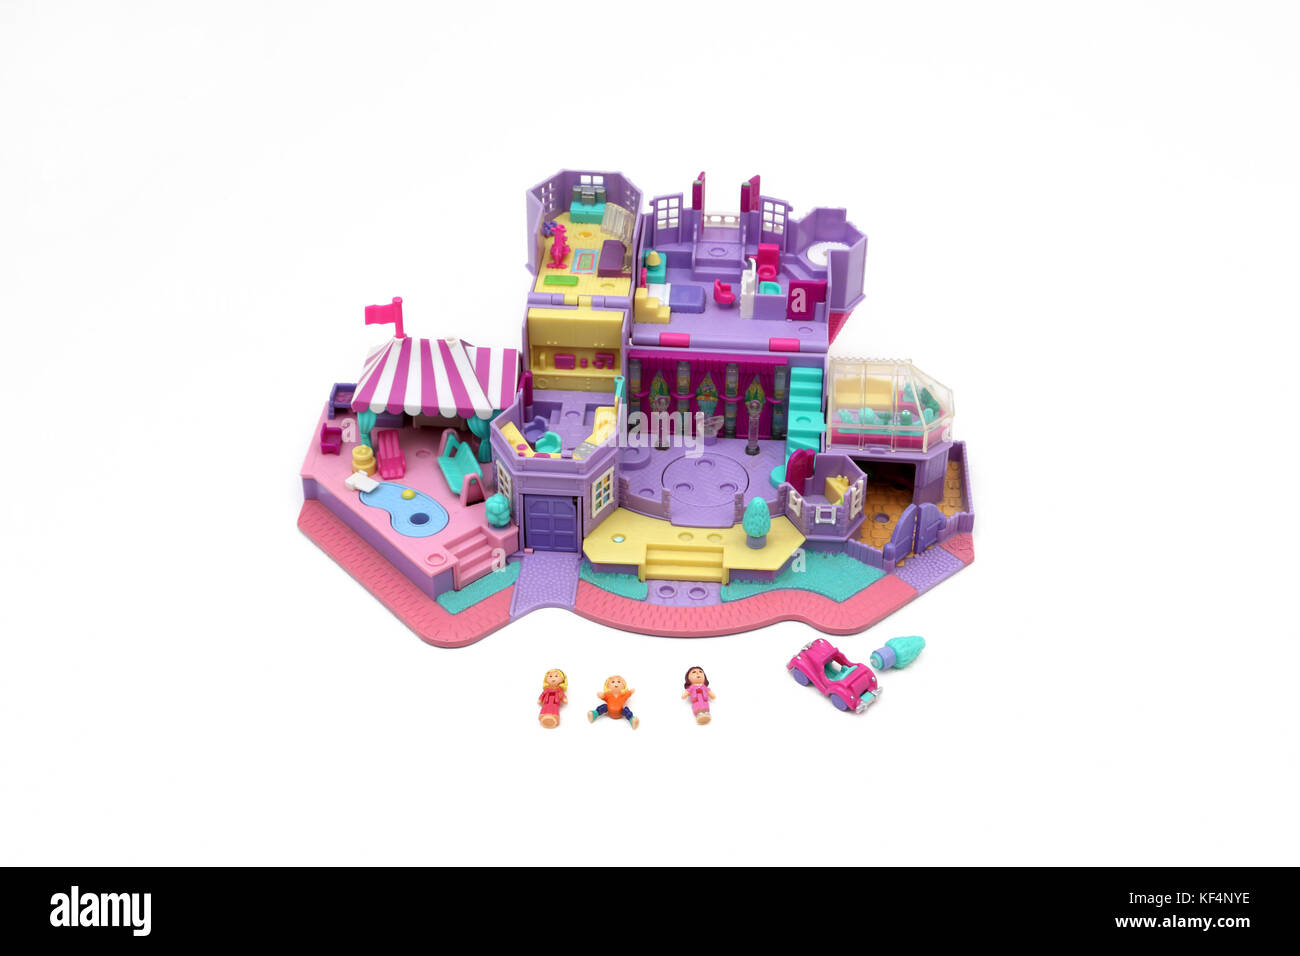 Polly Pocket High Resolution Stock Photography and Images - Alamy